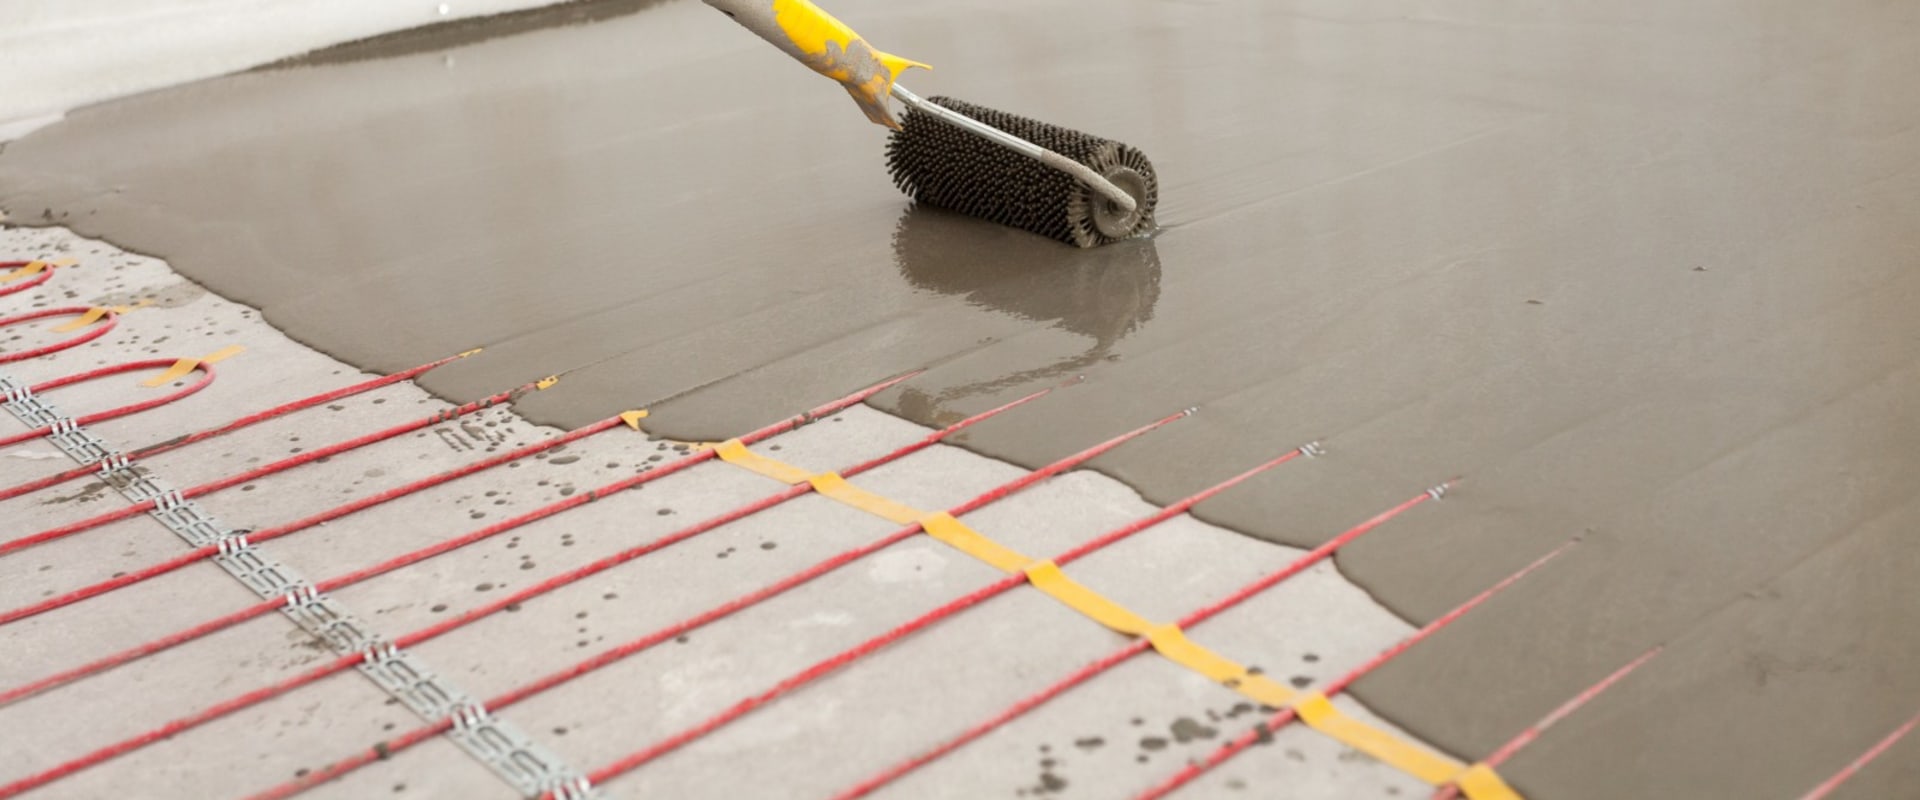 Does a heated floor use a lot of electricity?